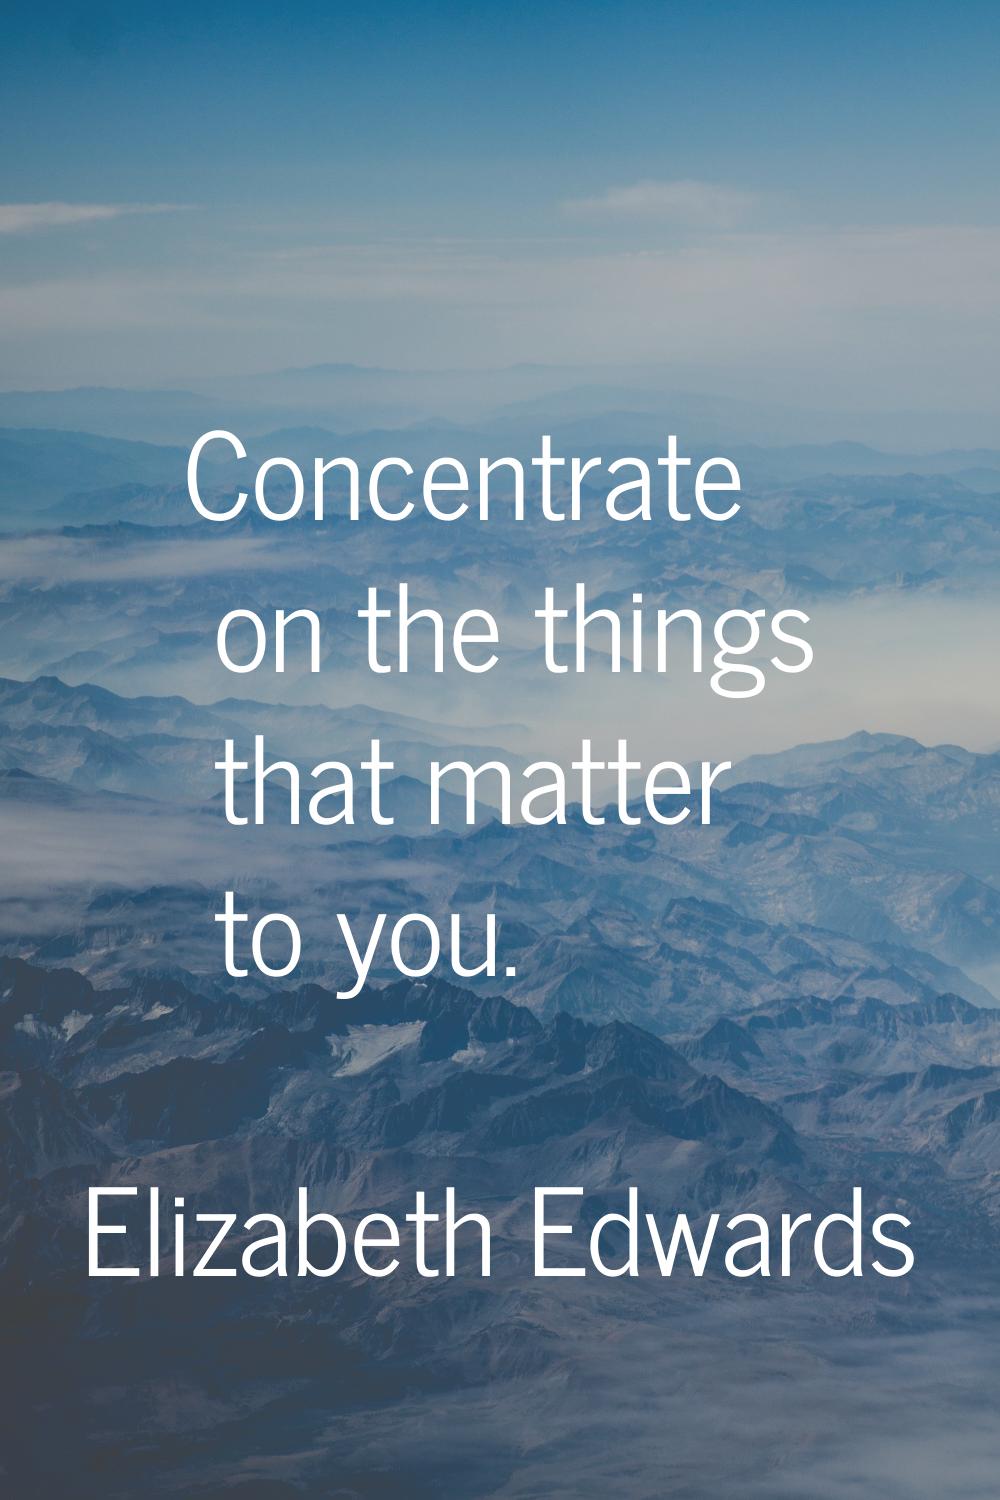 Concentrate on the things that matter to you.